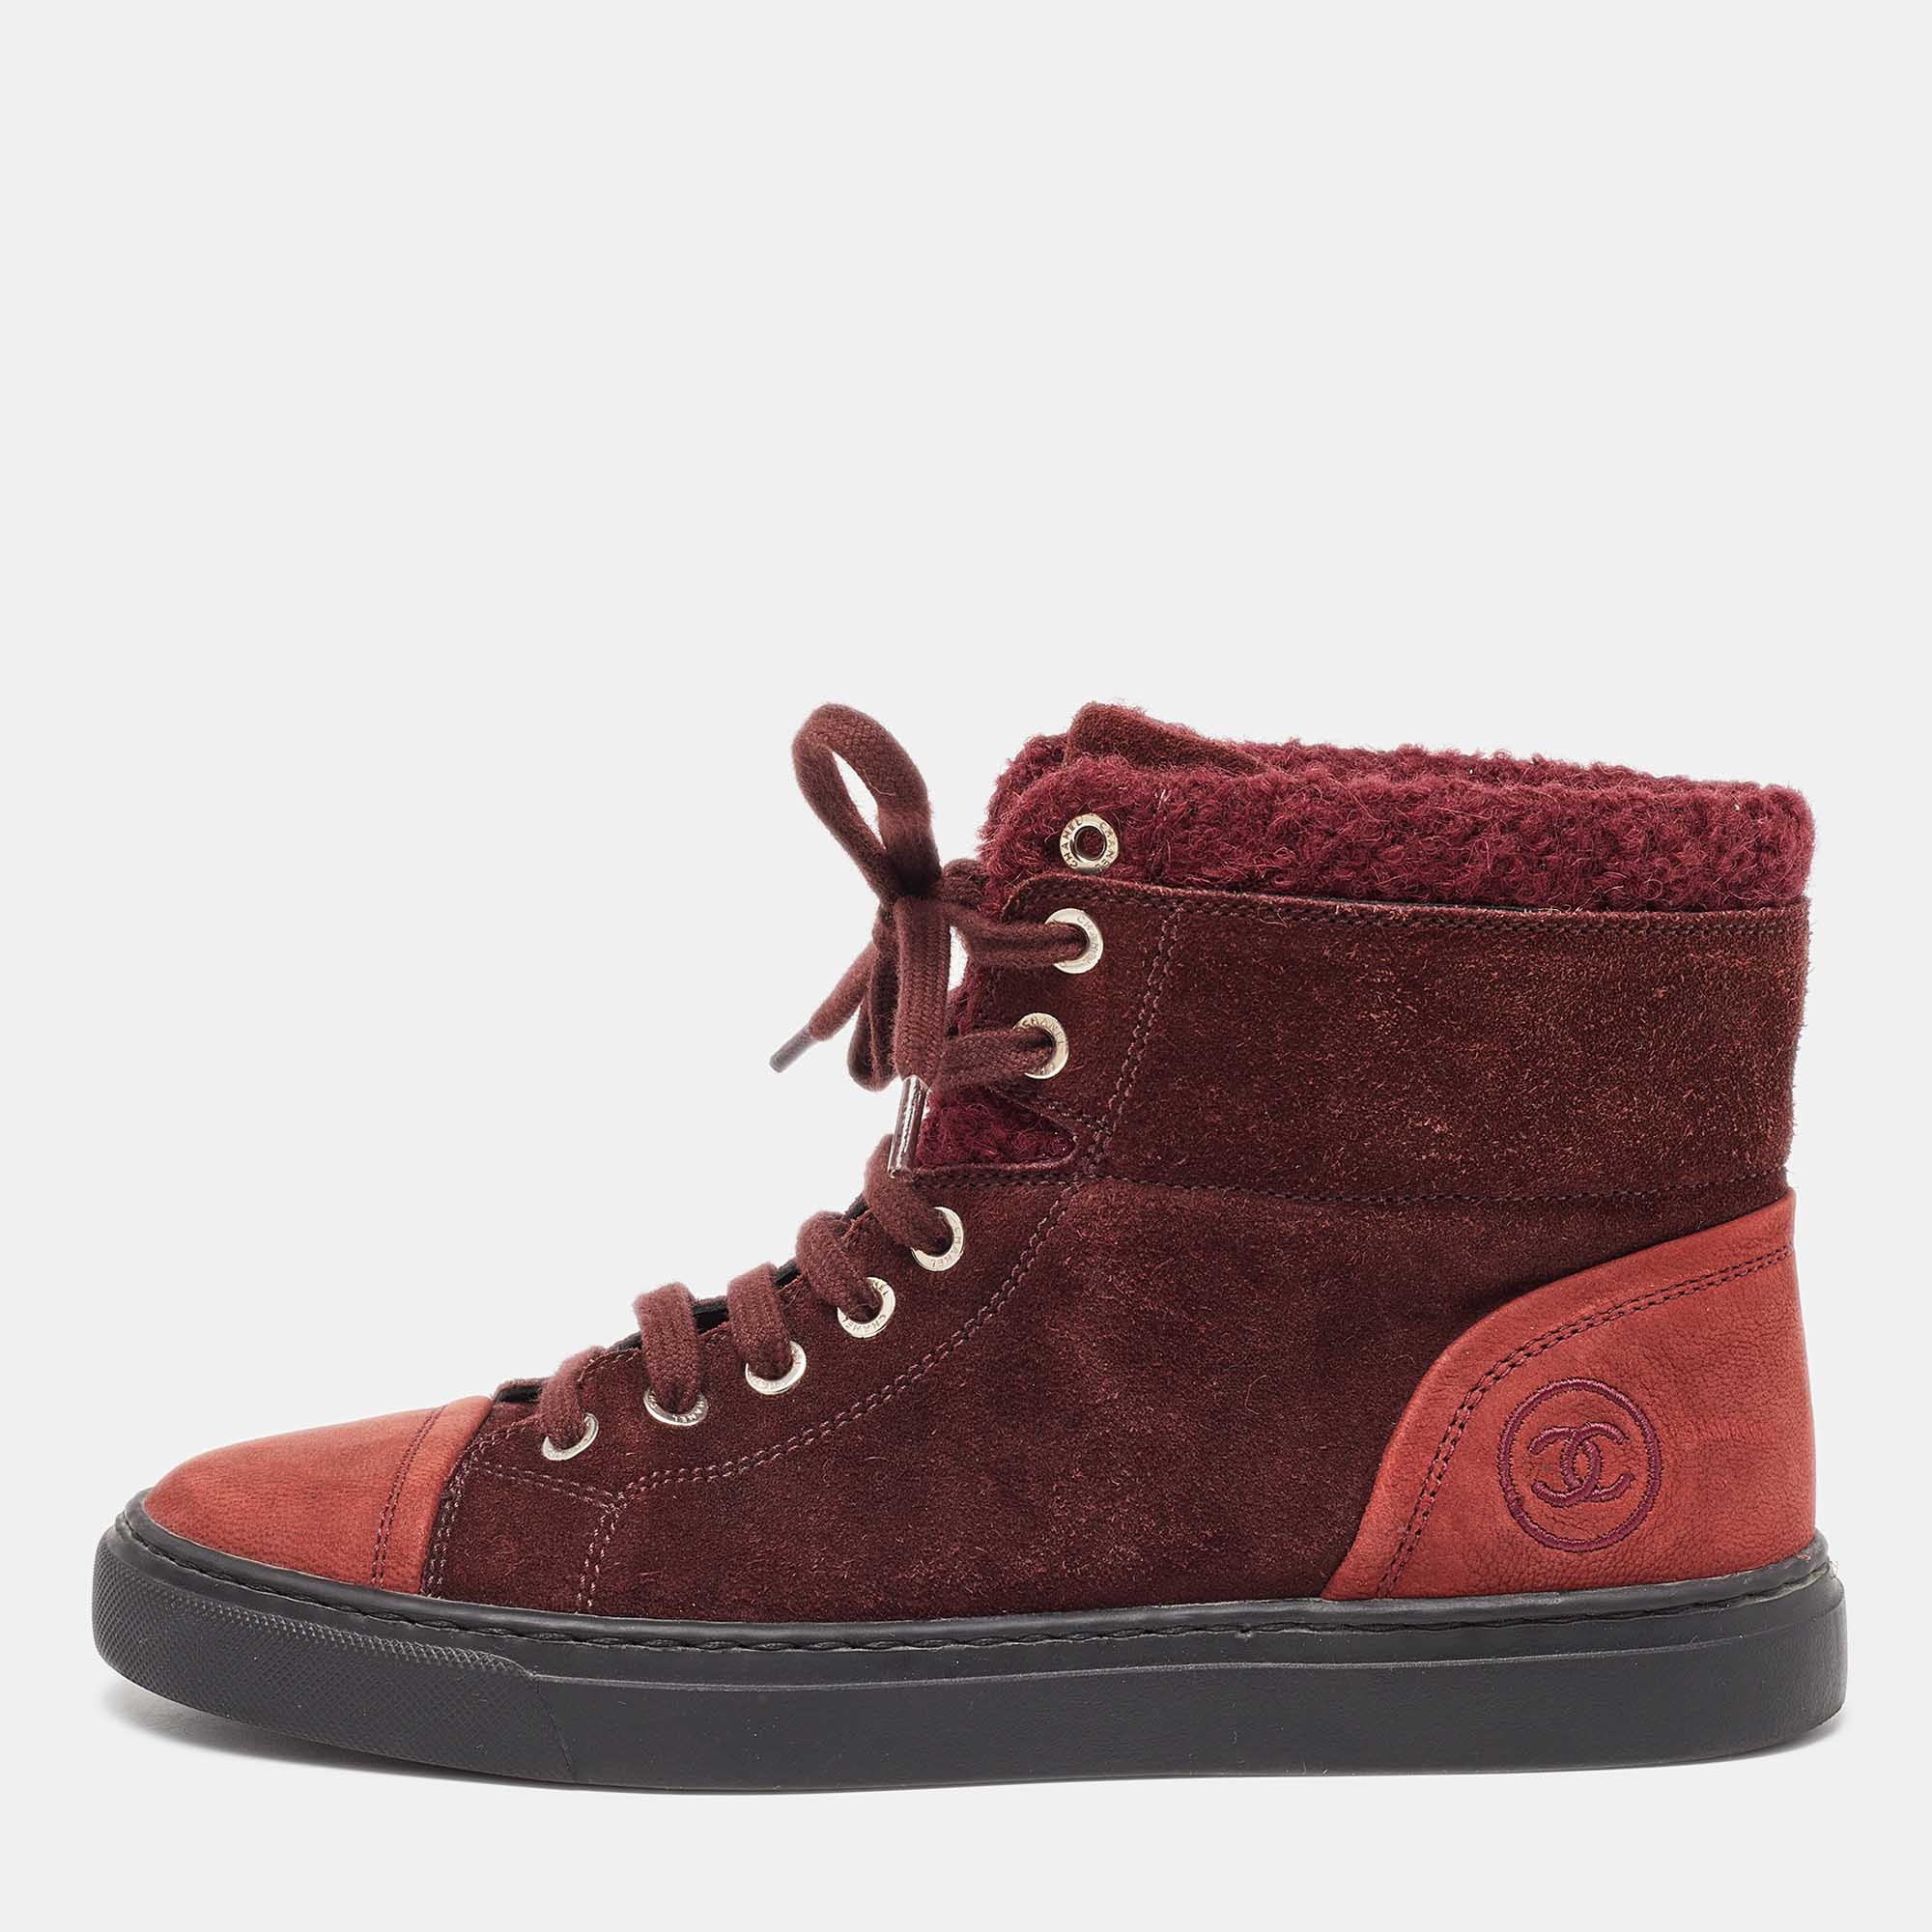 These Chanel sneakers are warm and gorgeous Theyve been carefully crafted from a mix of suede and designed with wool trims lace up vamps and the CC logo. You are sure to feel fashionable in this pair.